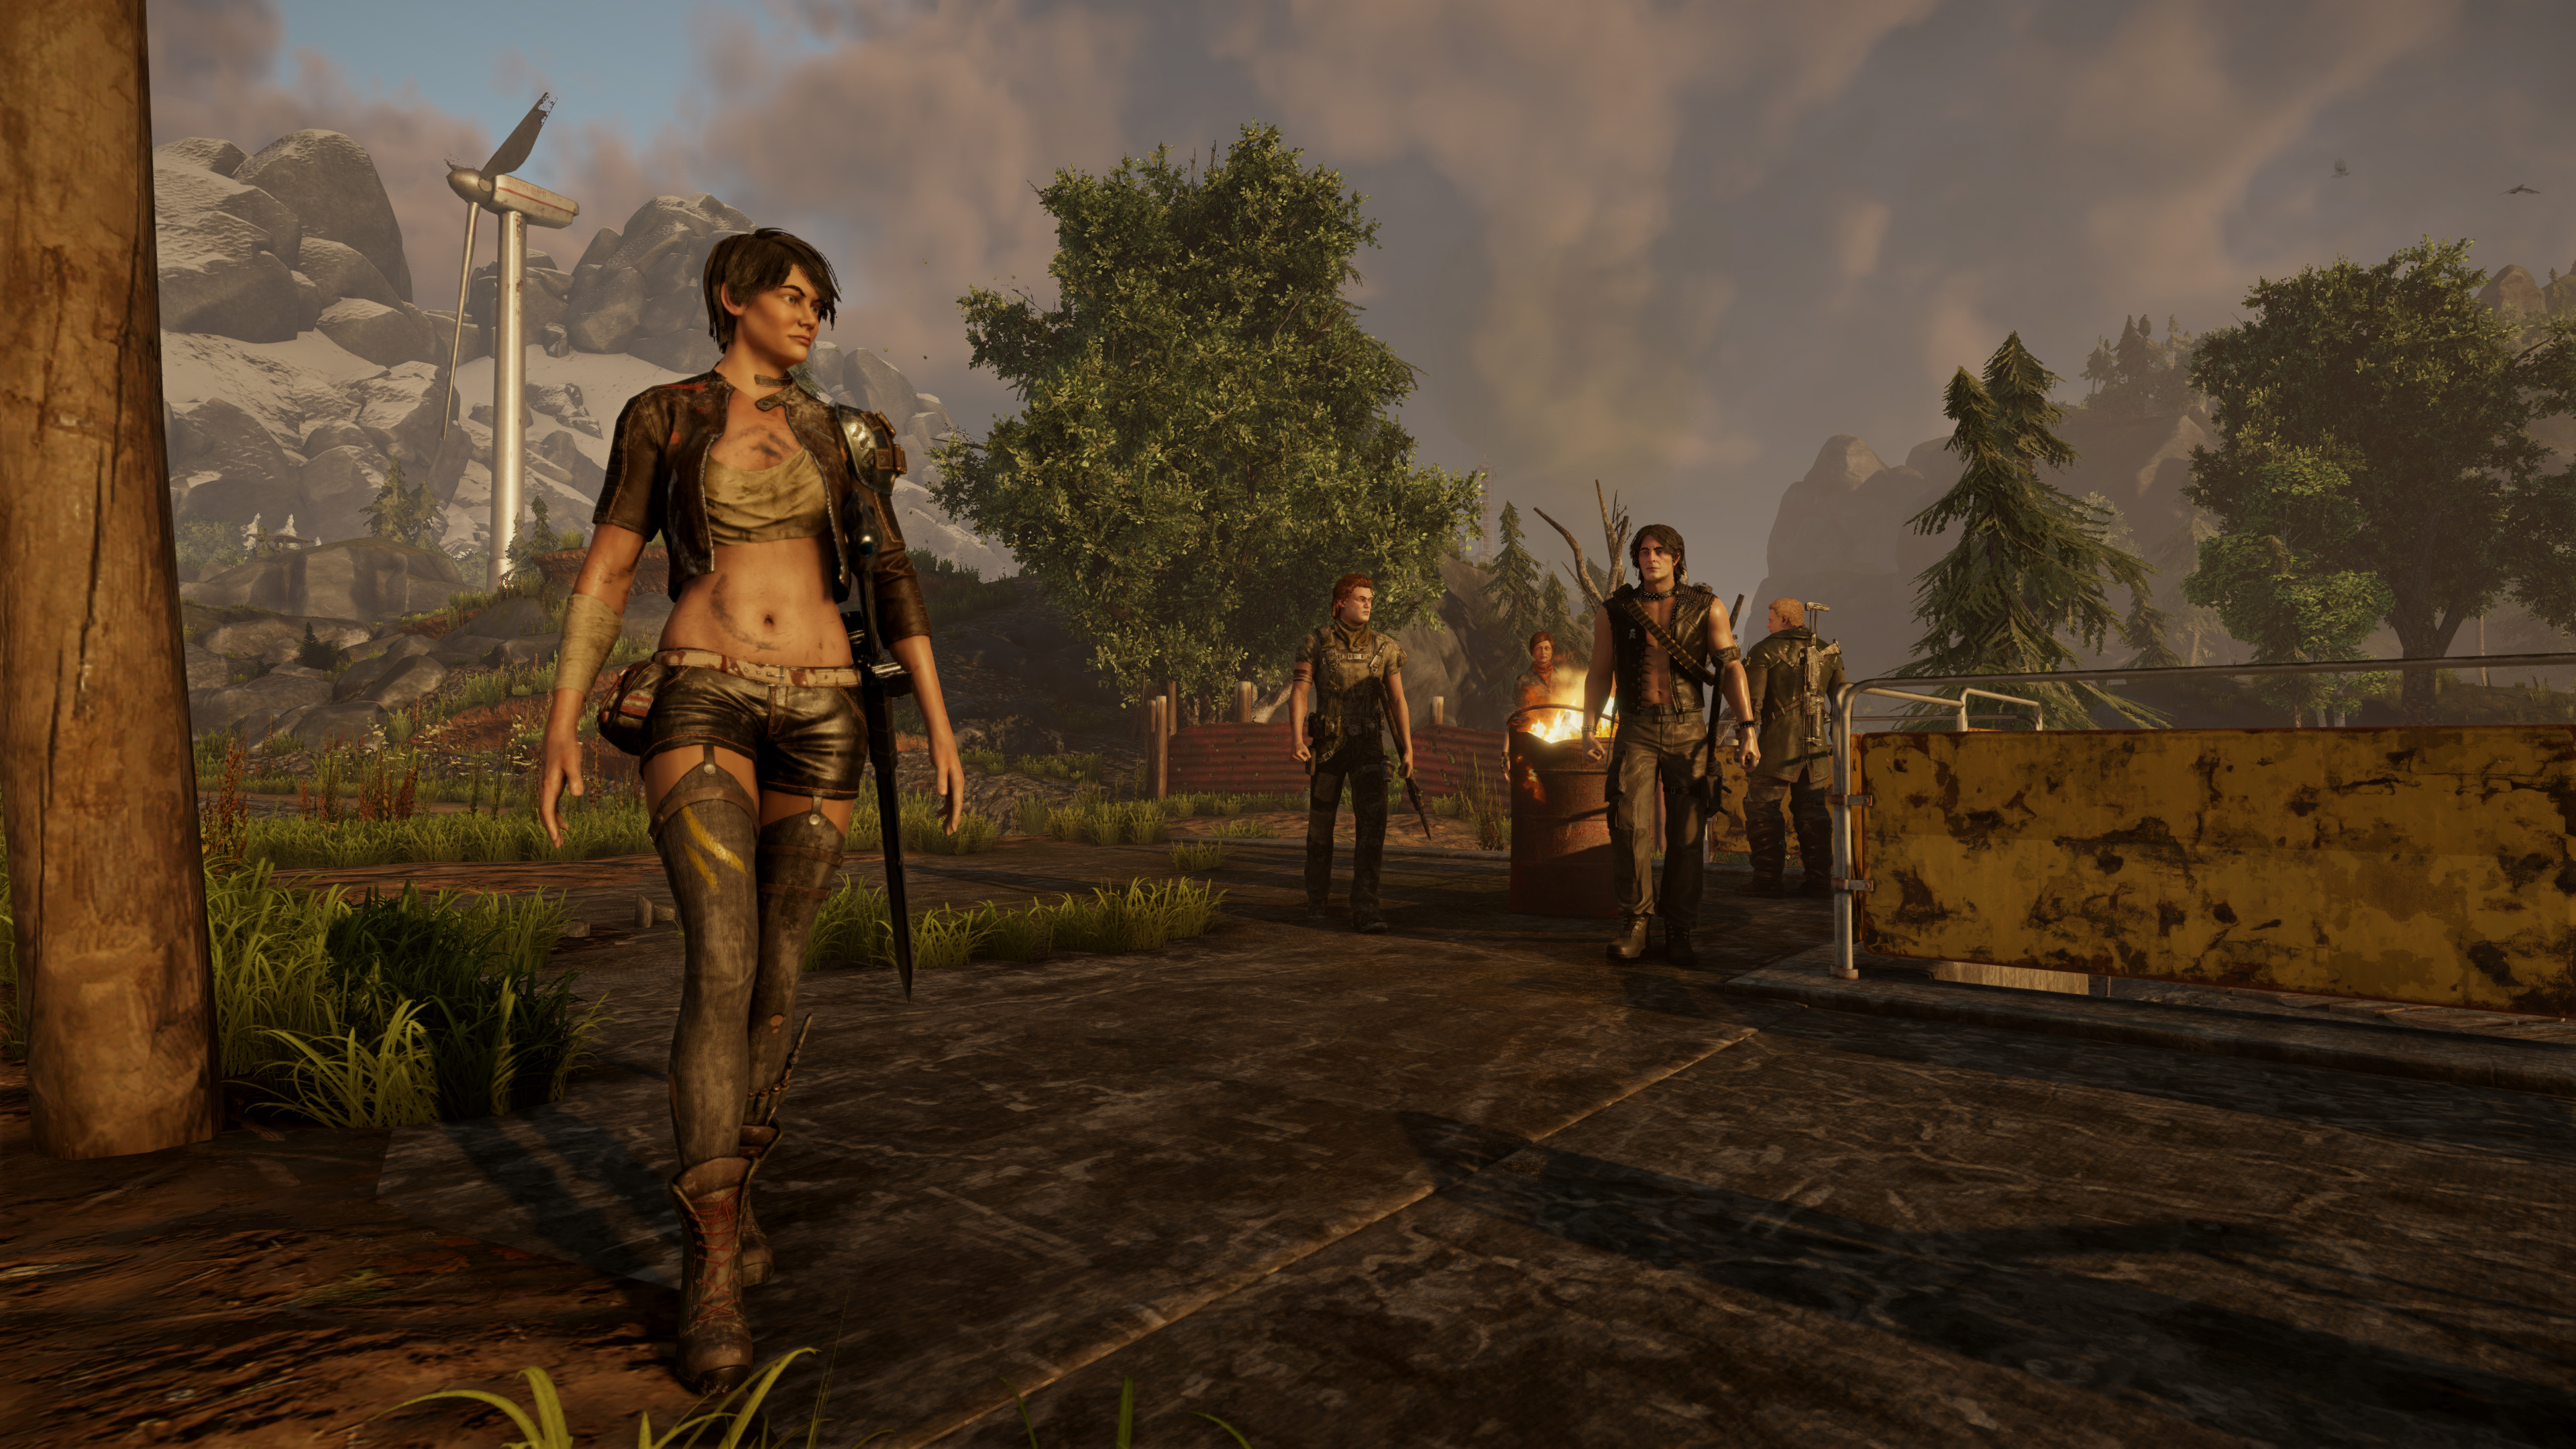 Media asset in full size related to 3dfxzone.it news item entitled as follows: Gameplay trailer e screenshots in 4K del game action RPG fantasy ELEX | Image Name: news24805_ELEX-Screenshot_3.jpg